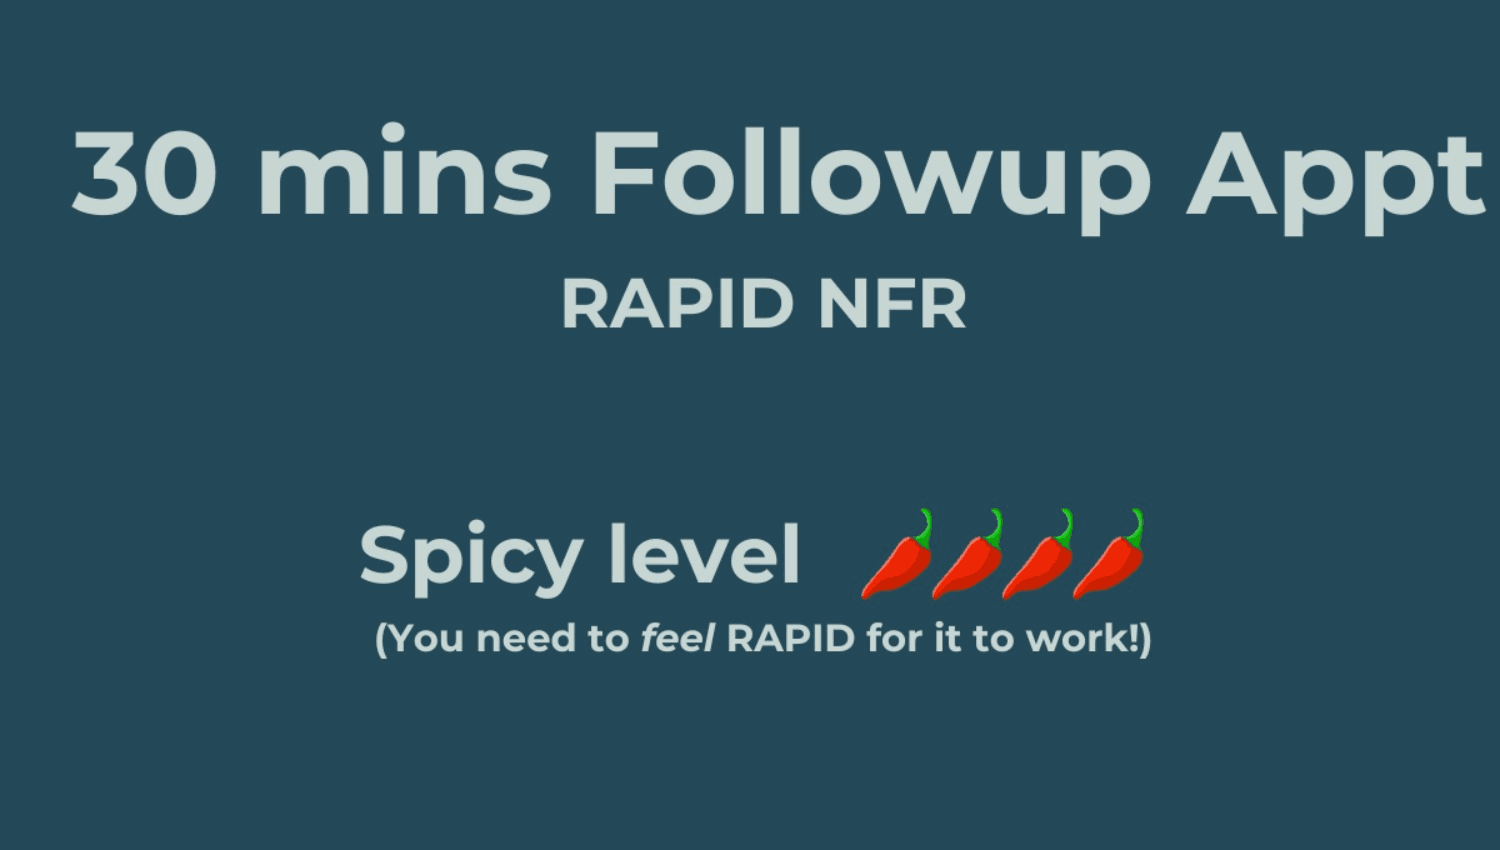 Image for 30 mins RAPID NFR FOLLOWUP